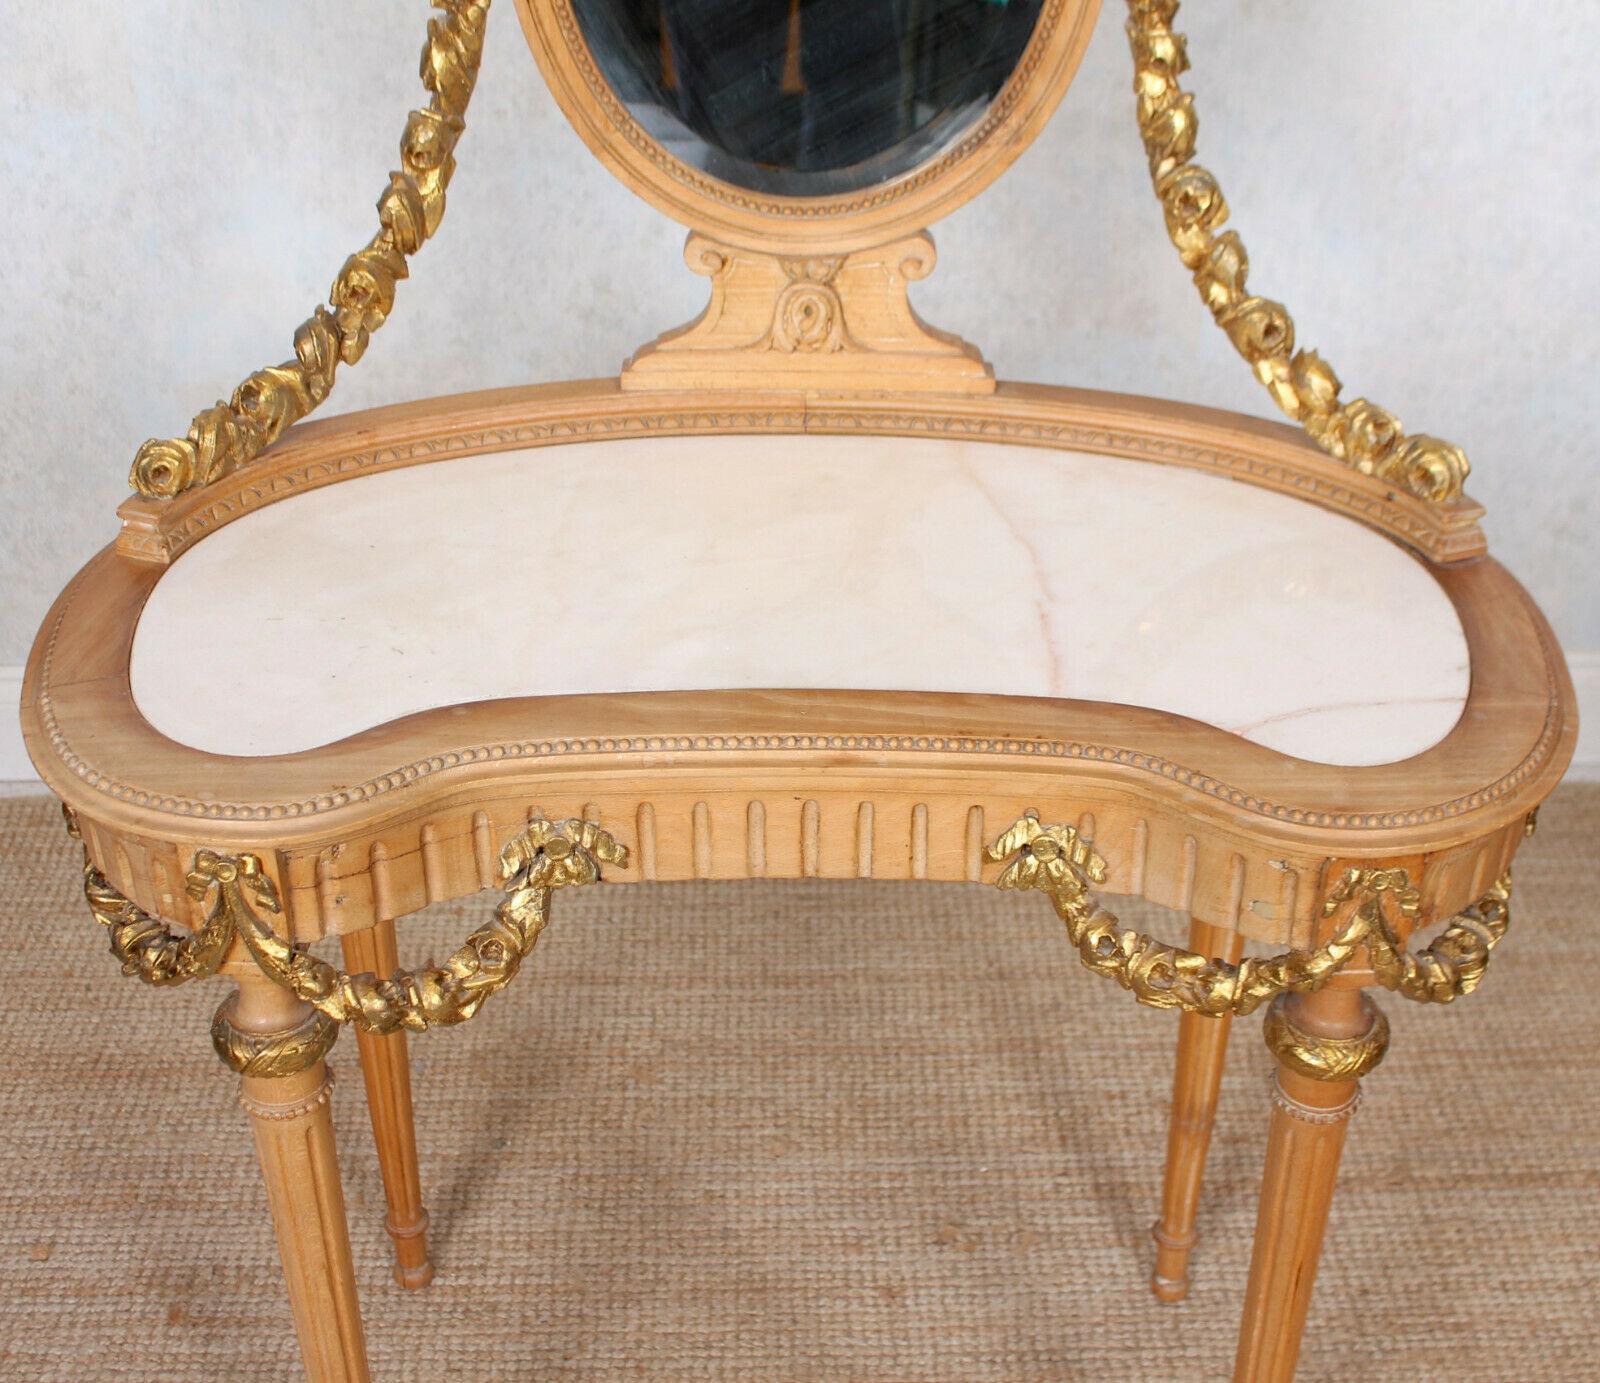 A fine quality marble and satinwood mirrored dressing table.

The oval beveled mirror on supports adorned with finely carved gilt rope twist swags matching the apron of the marble inset table and raised on slender fluted tapering legs.

An aged